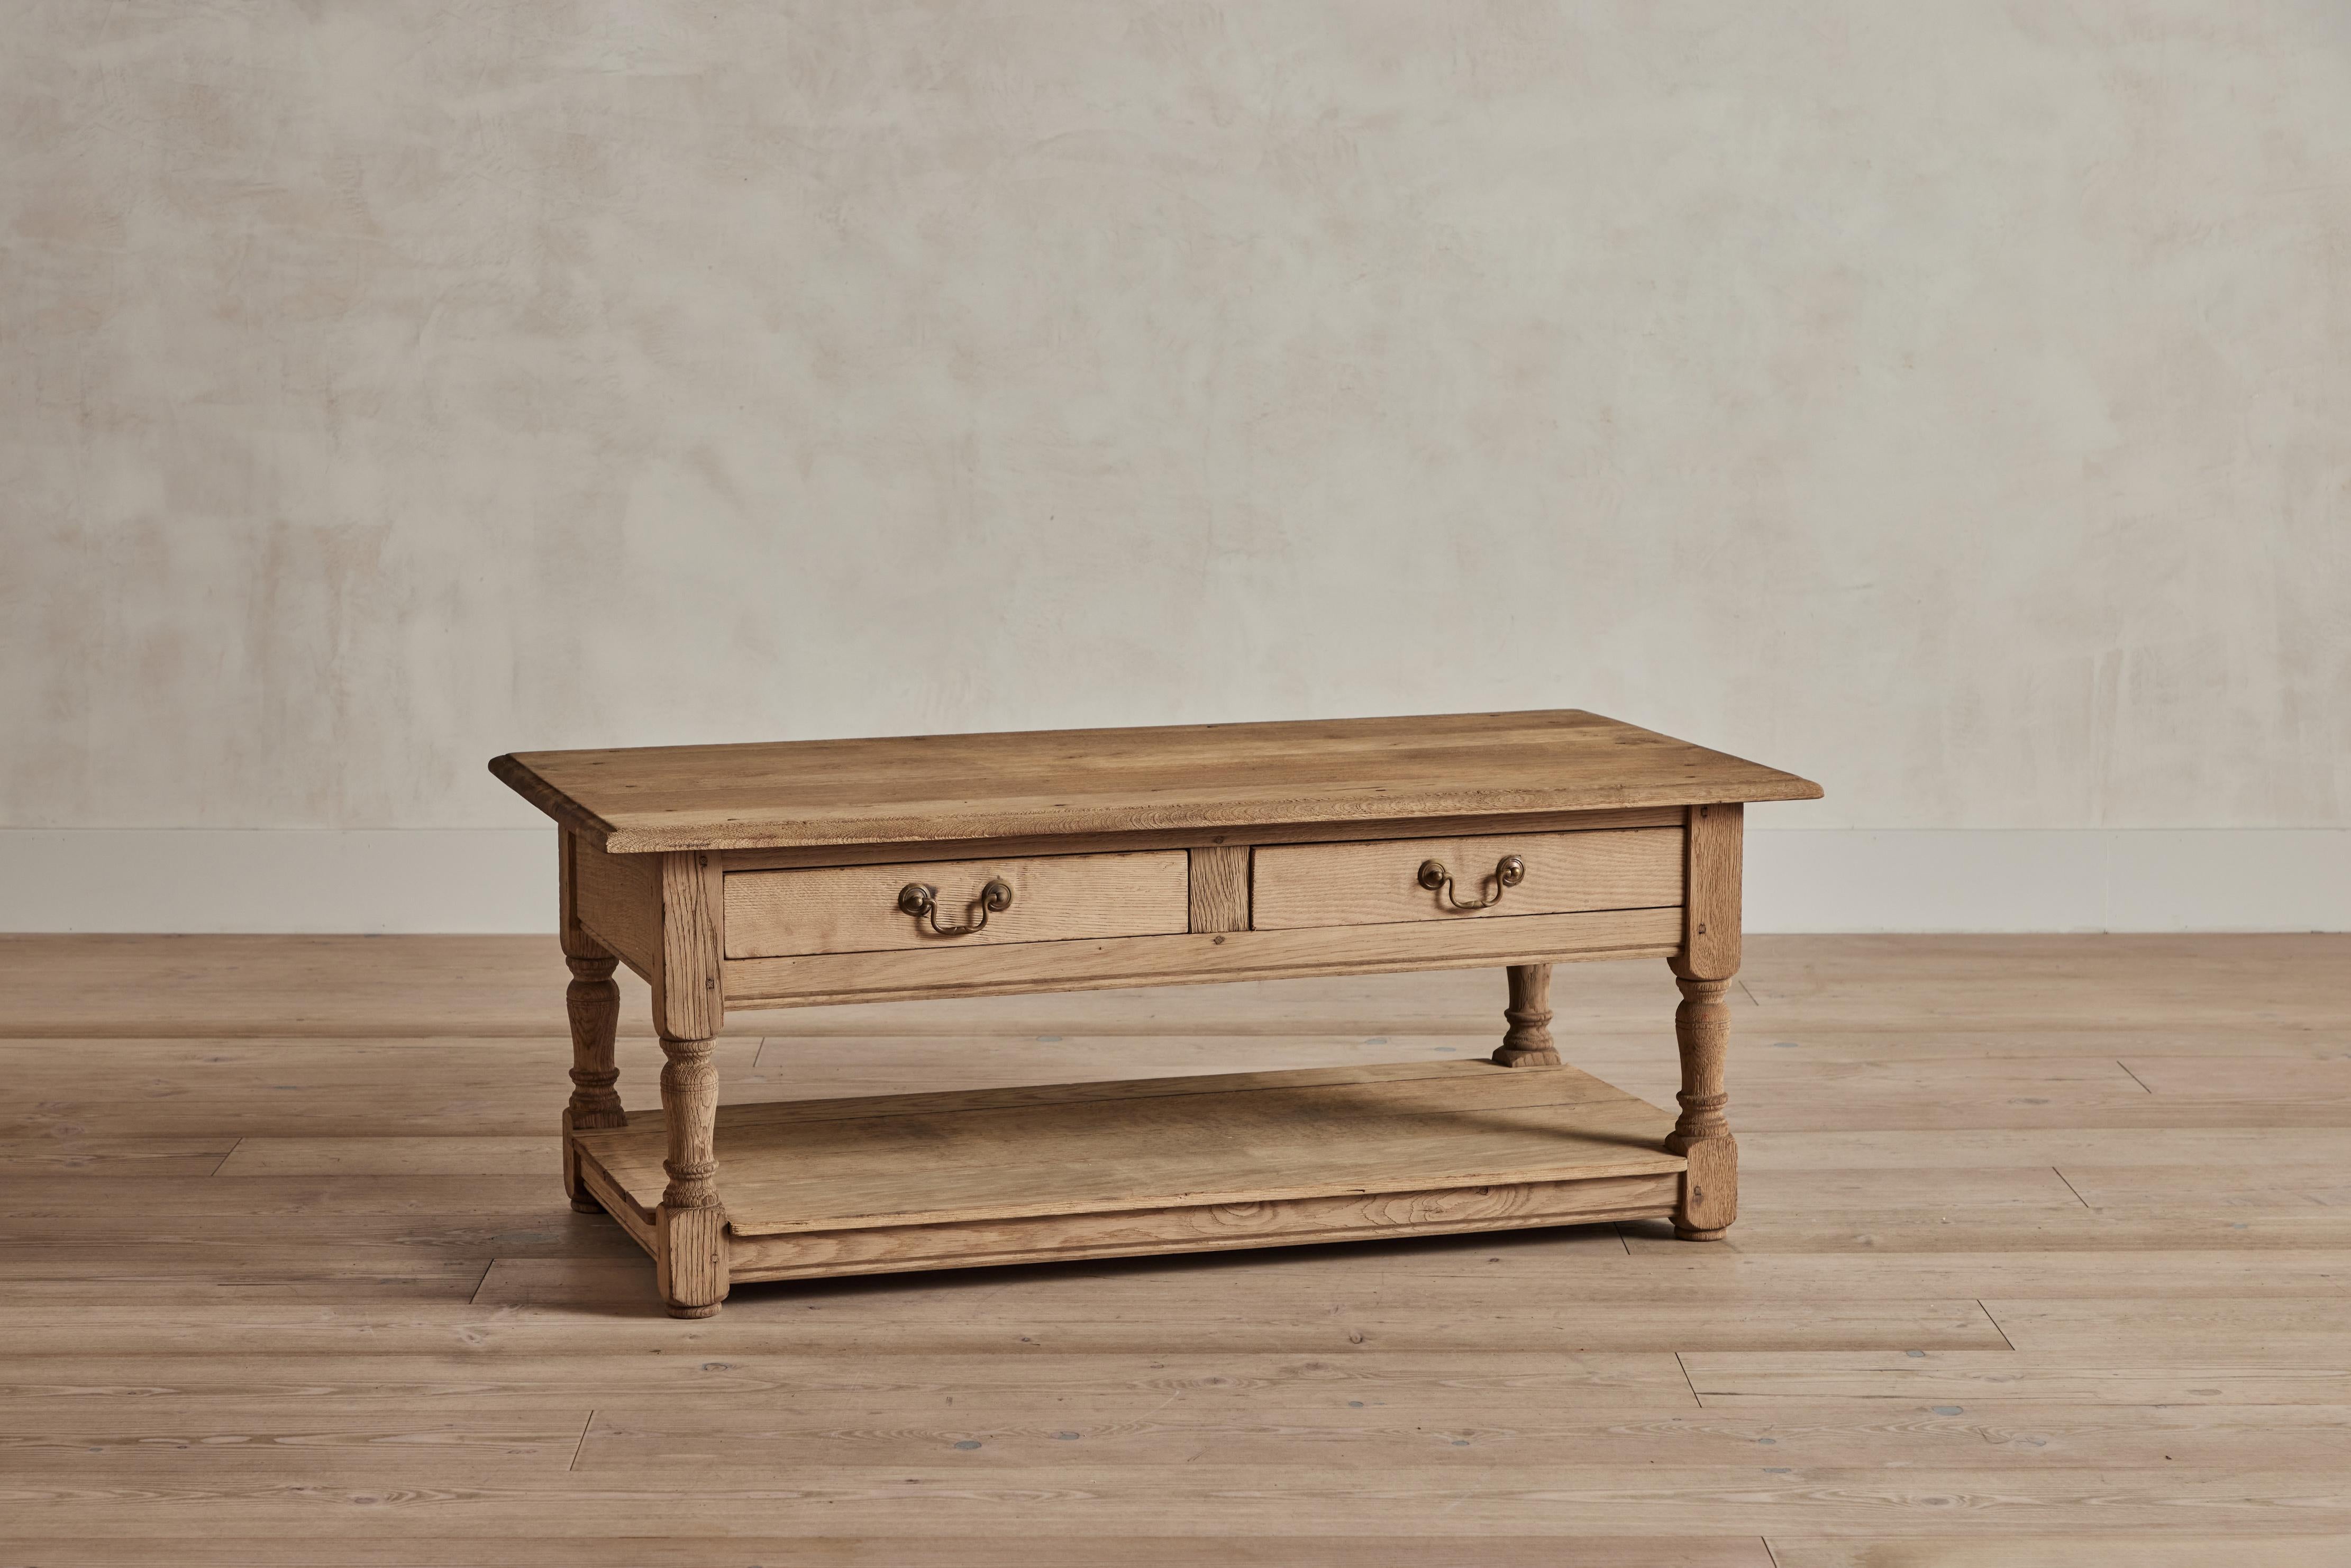 Danish 1960s two drawer coffee table with turned wood legs and lower shelf. Made of solid oak some visible wear that is consistent with age and use.  